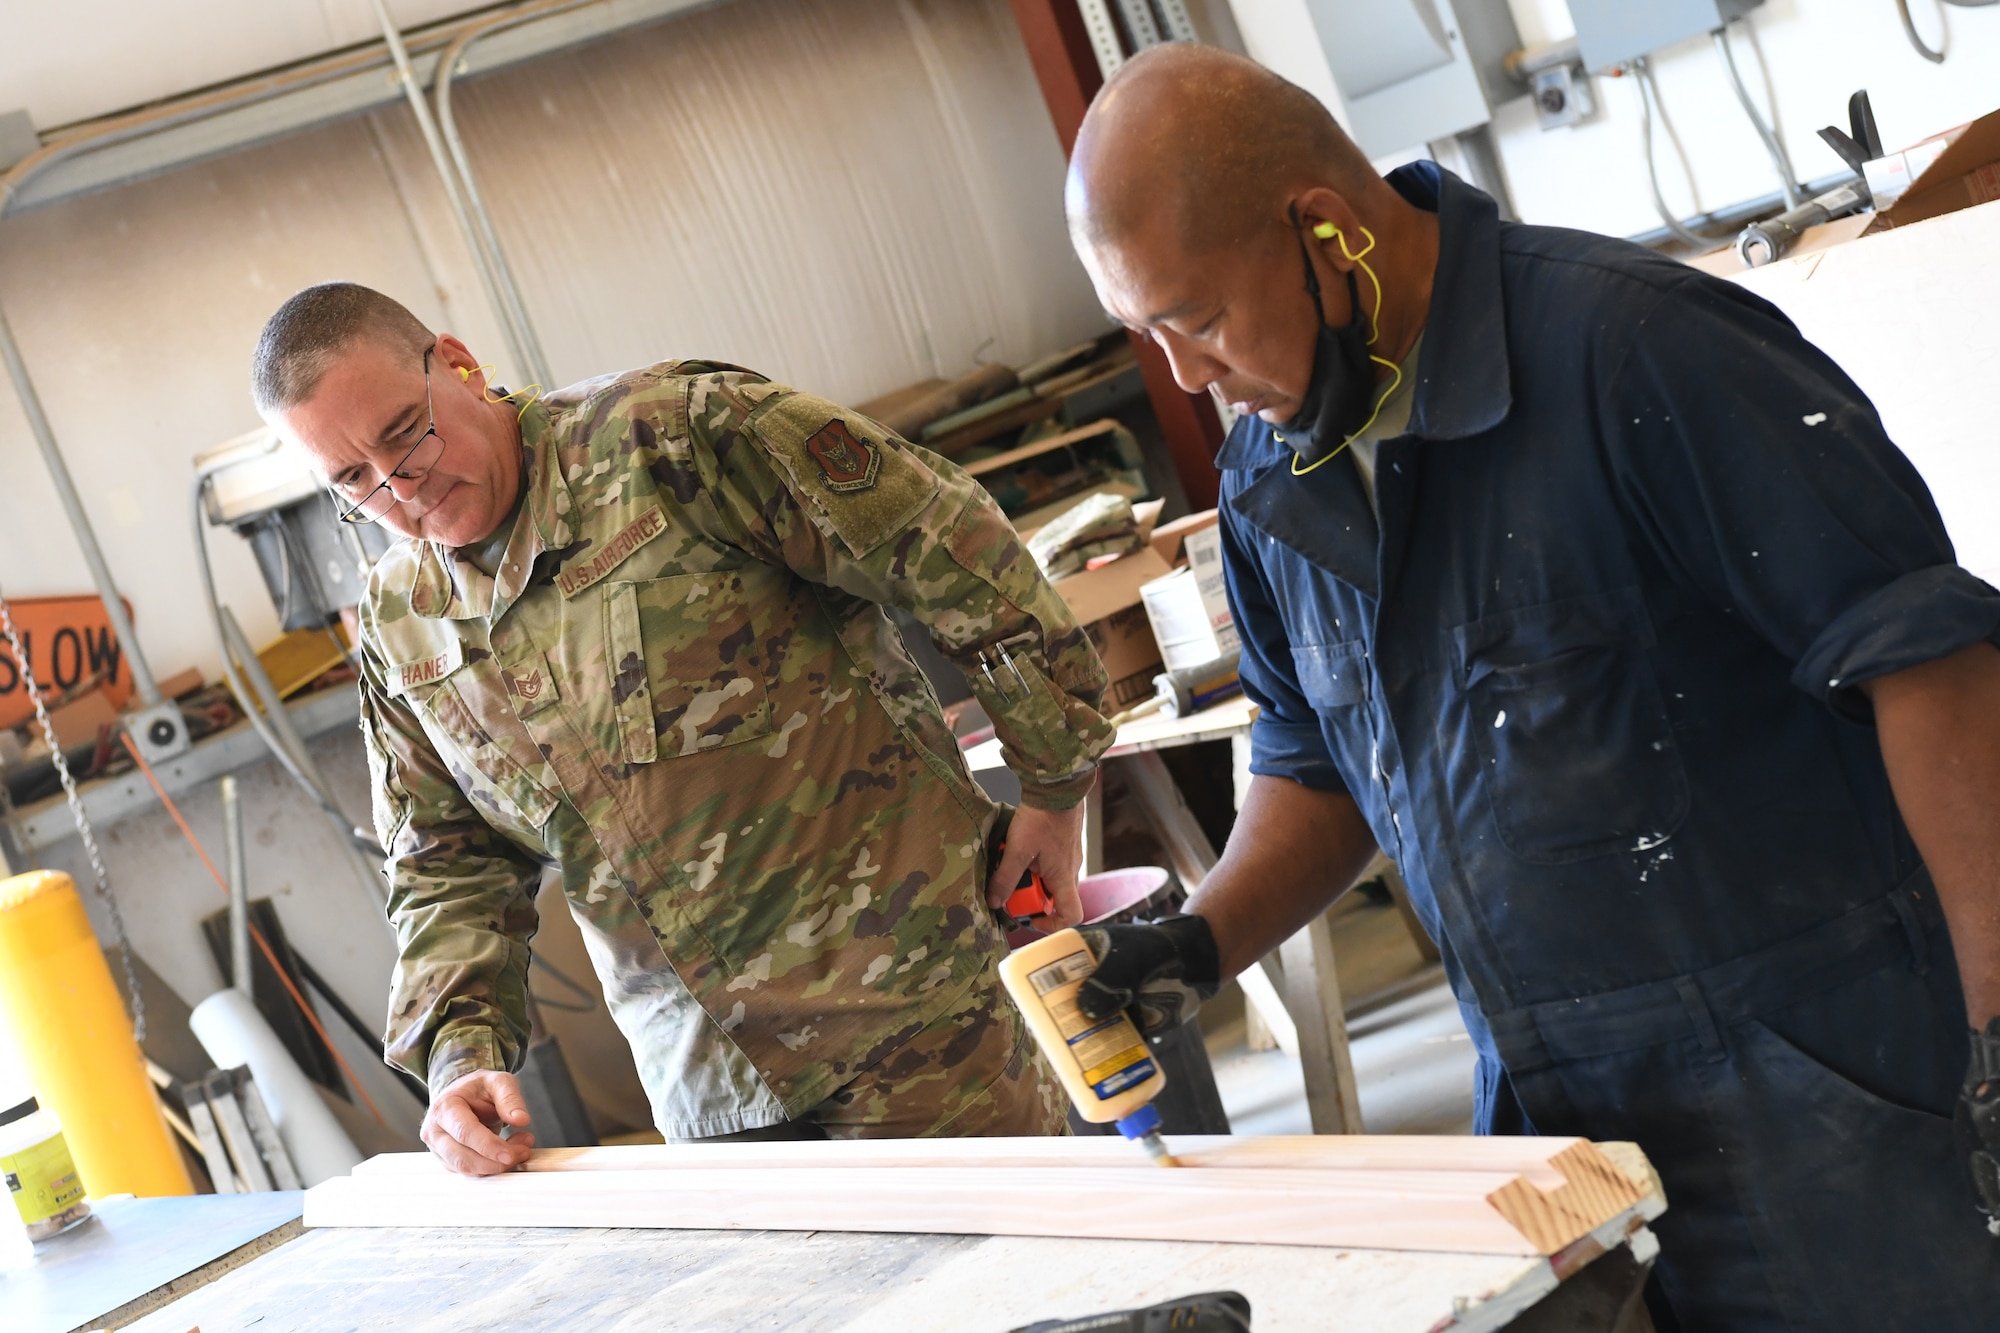 A photo of U.S. Air Force Tech. Sgt. Jason Haner and Tech Sgt Adonico Balingnasay, 624th Civil Engineer Squadron, preparing molding for facility repairs at Bellows Air Force Station, Hawaii, July 22, 2020, during the unit’s Annual Training. The U.S. Air Force Reserve’s 624th CES provided necessary repairs at Bellows AFS, a Military Welfare and Recreation facility that supports military families and communities, to improve infrastructure and increase individual readiness skills. (U.S. Air Force photo by Tech. Sgt. Garrett Cole)